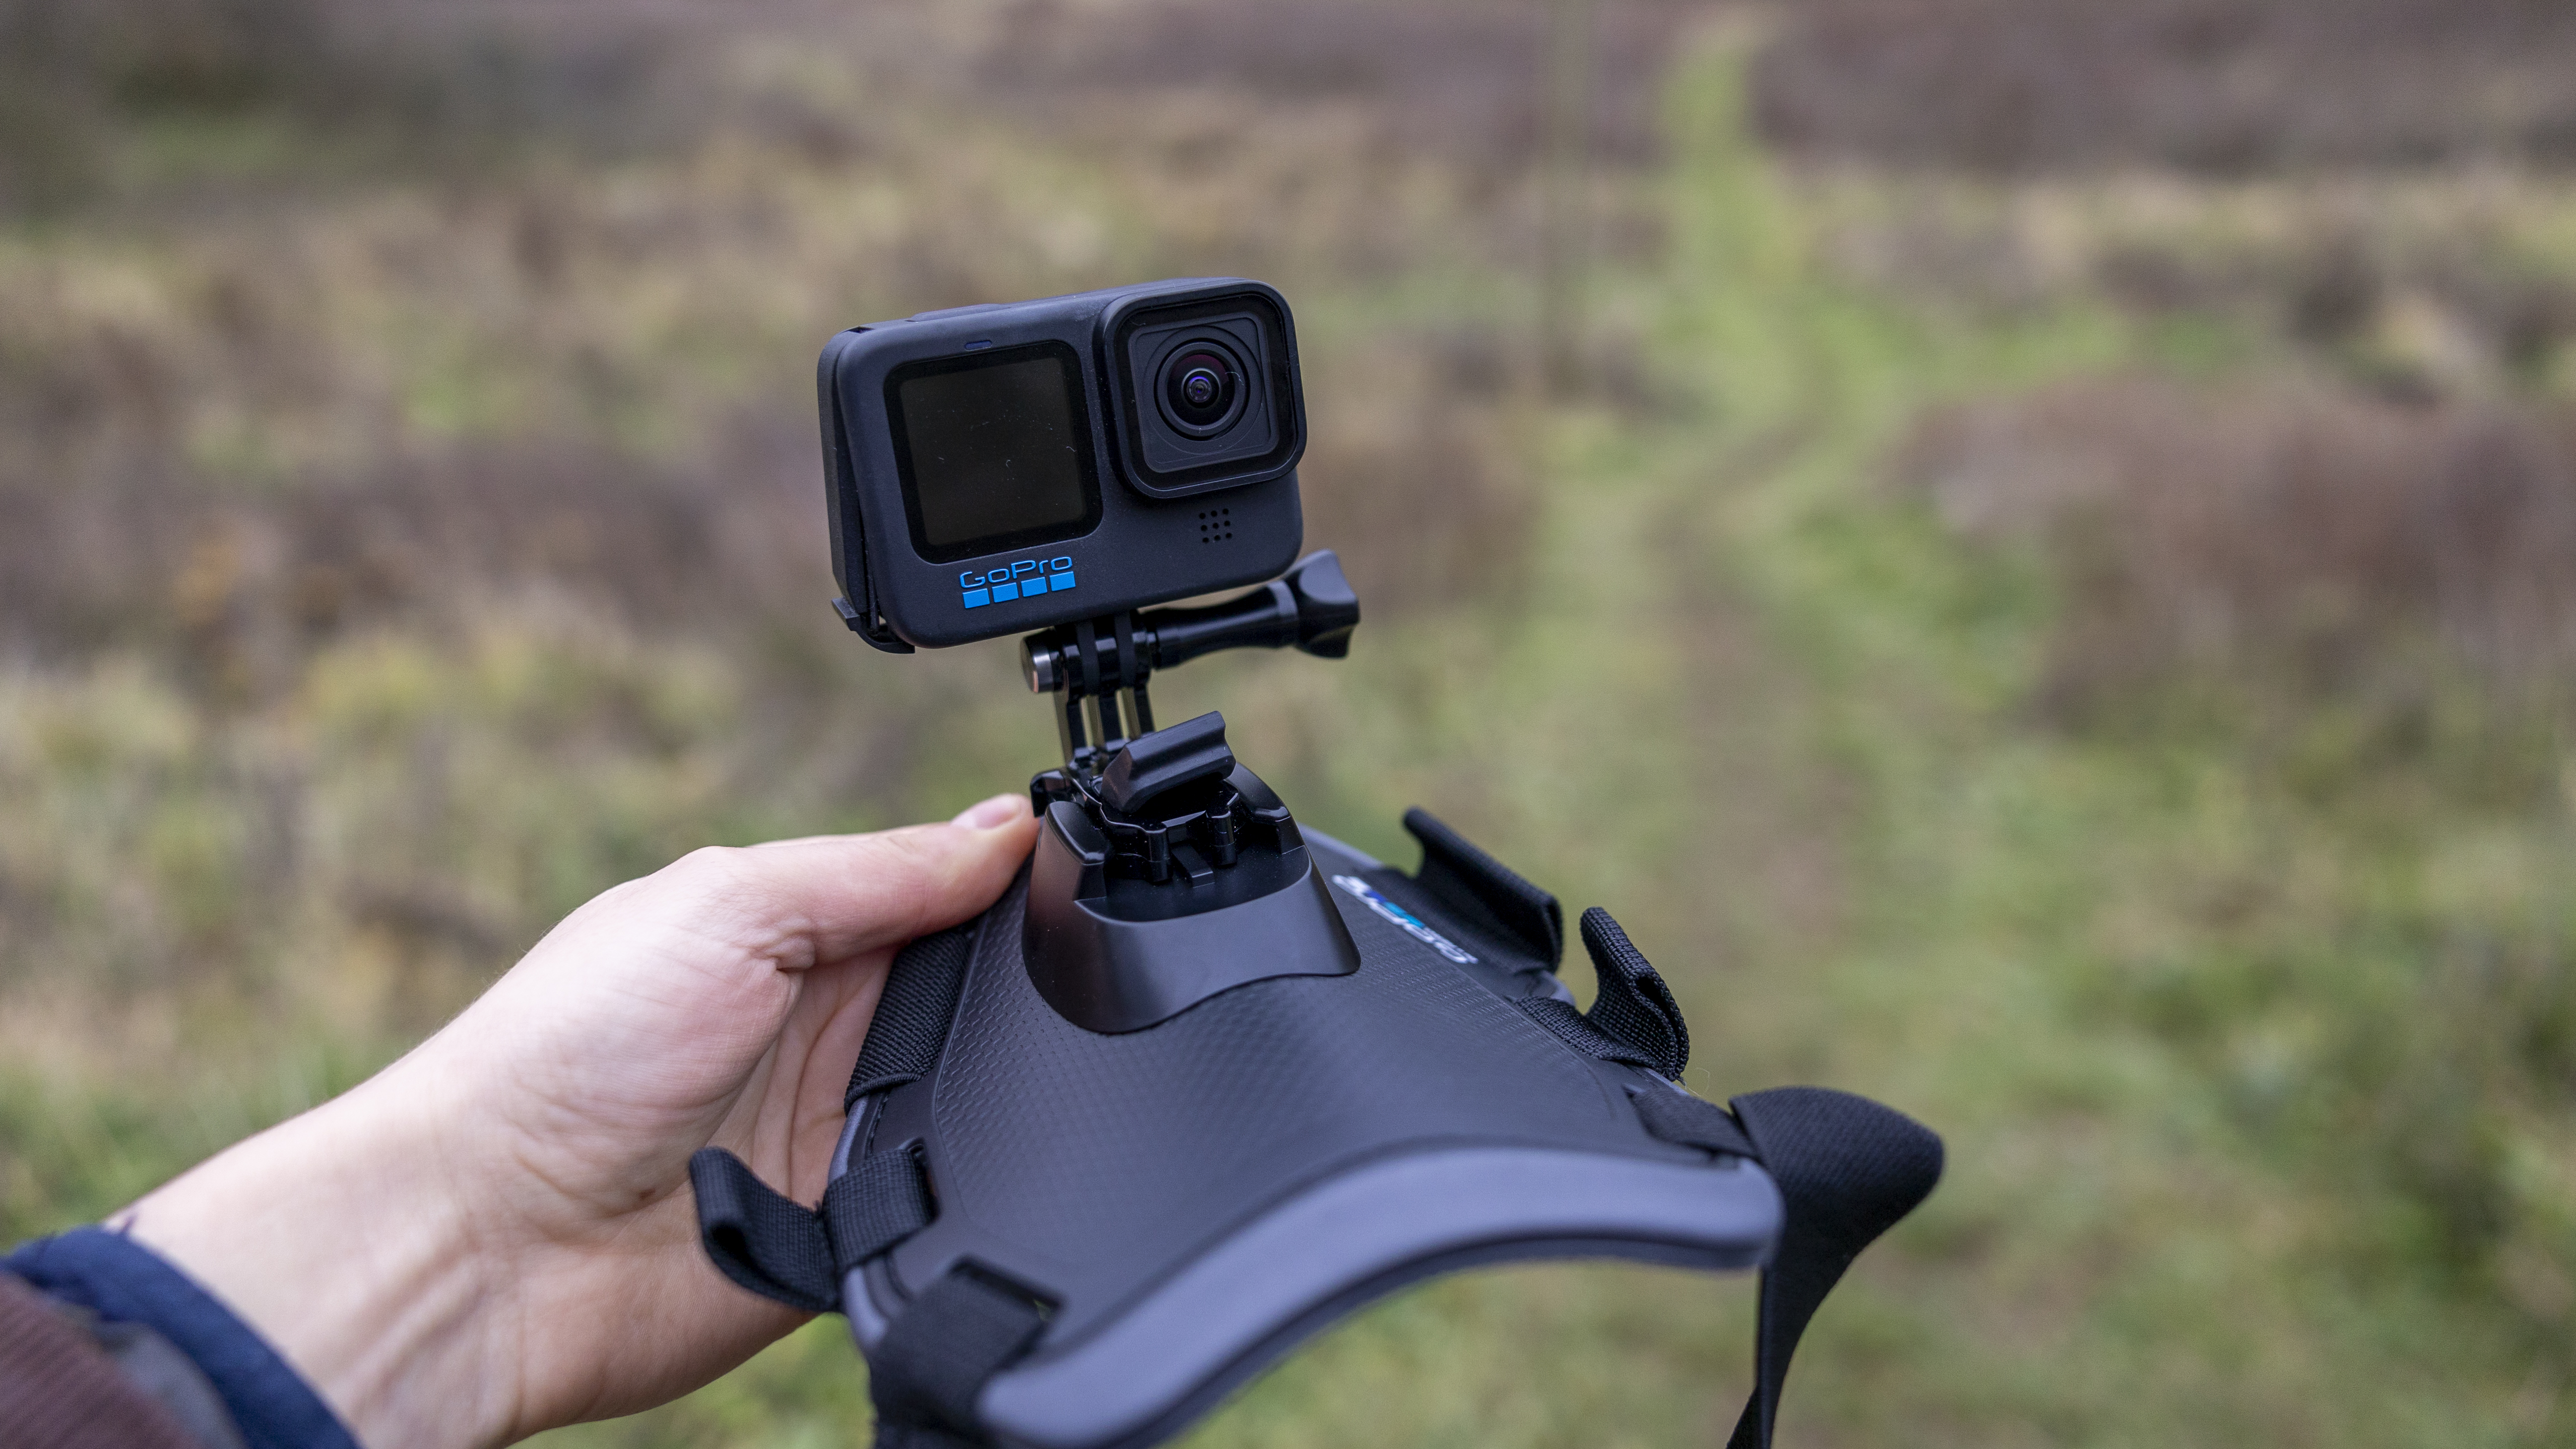 The GoPro Fetch Harness held in a woman's hands